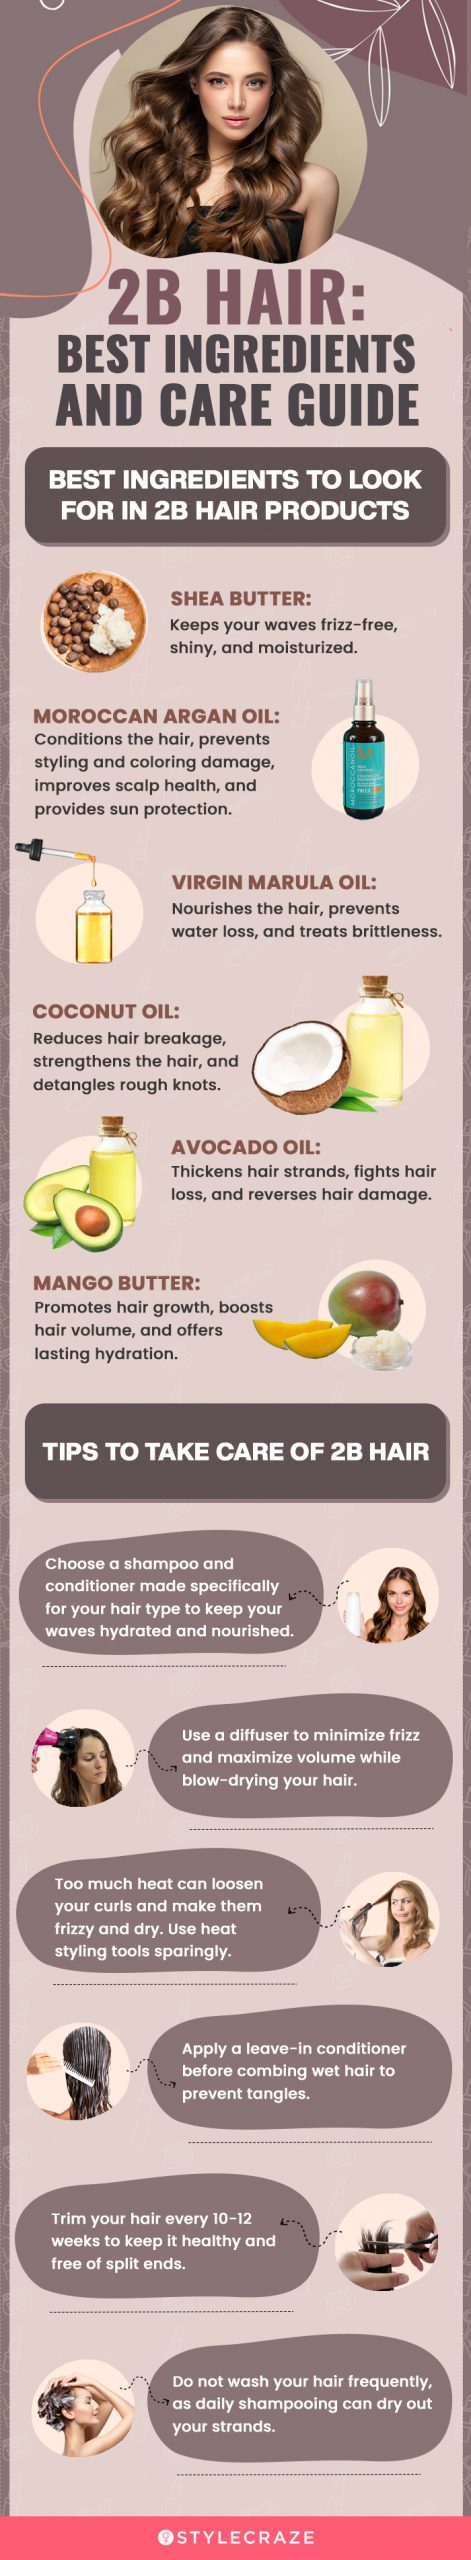 2B Hair: Best Ingredients And Care Guide (infographic)